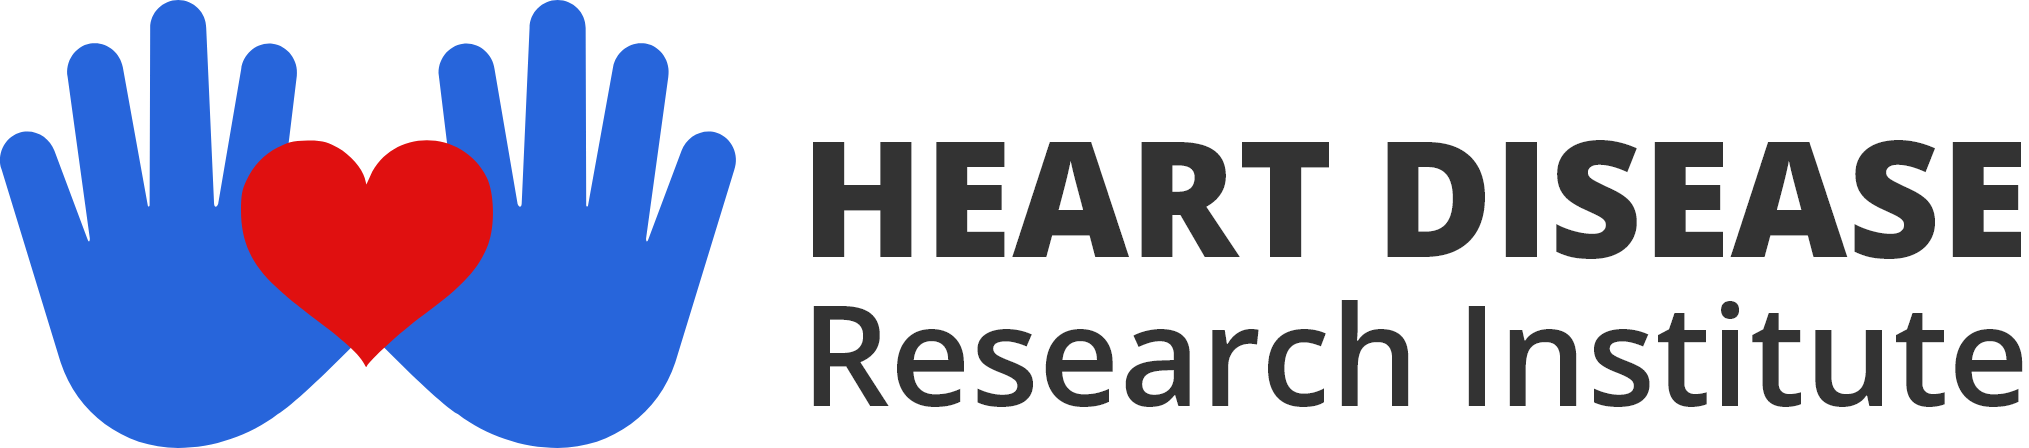 Heart Disease Aid and Research Fund logo